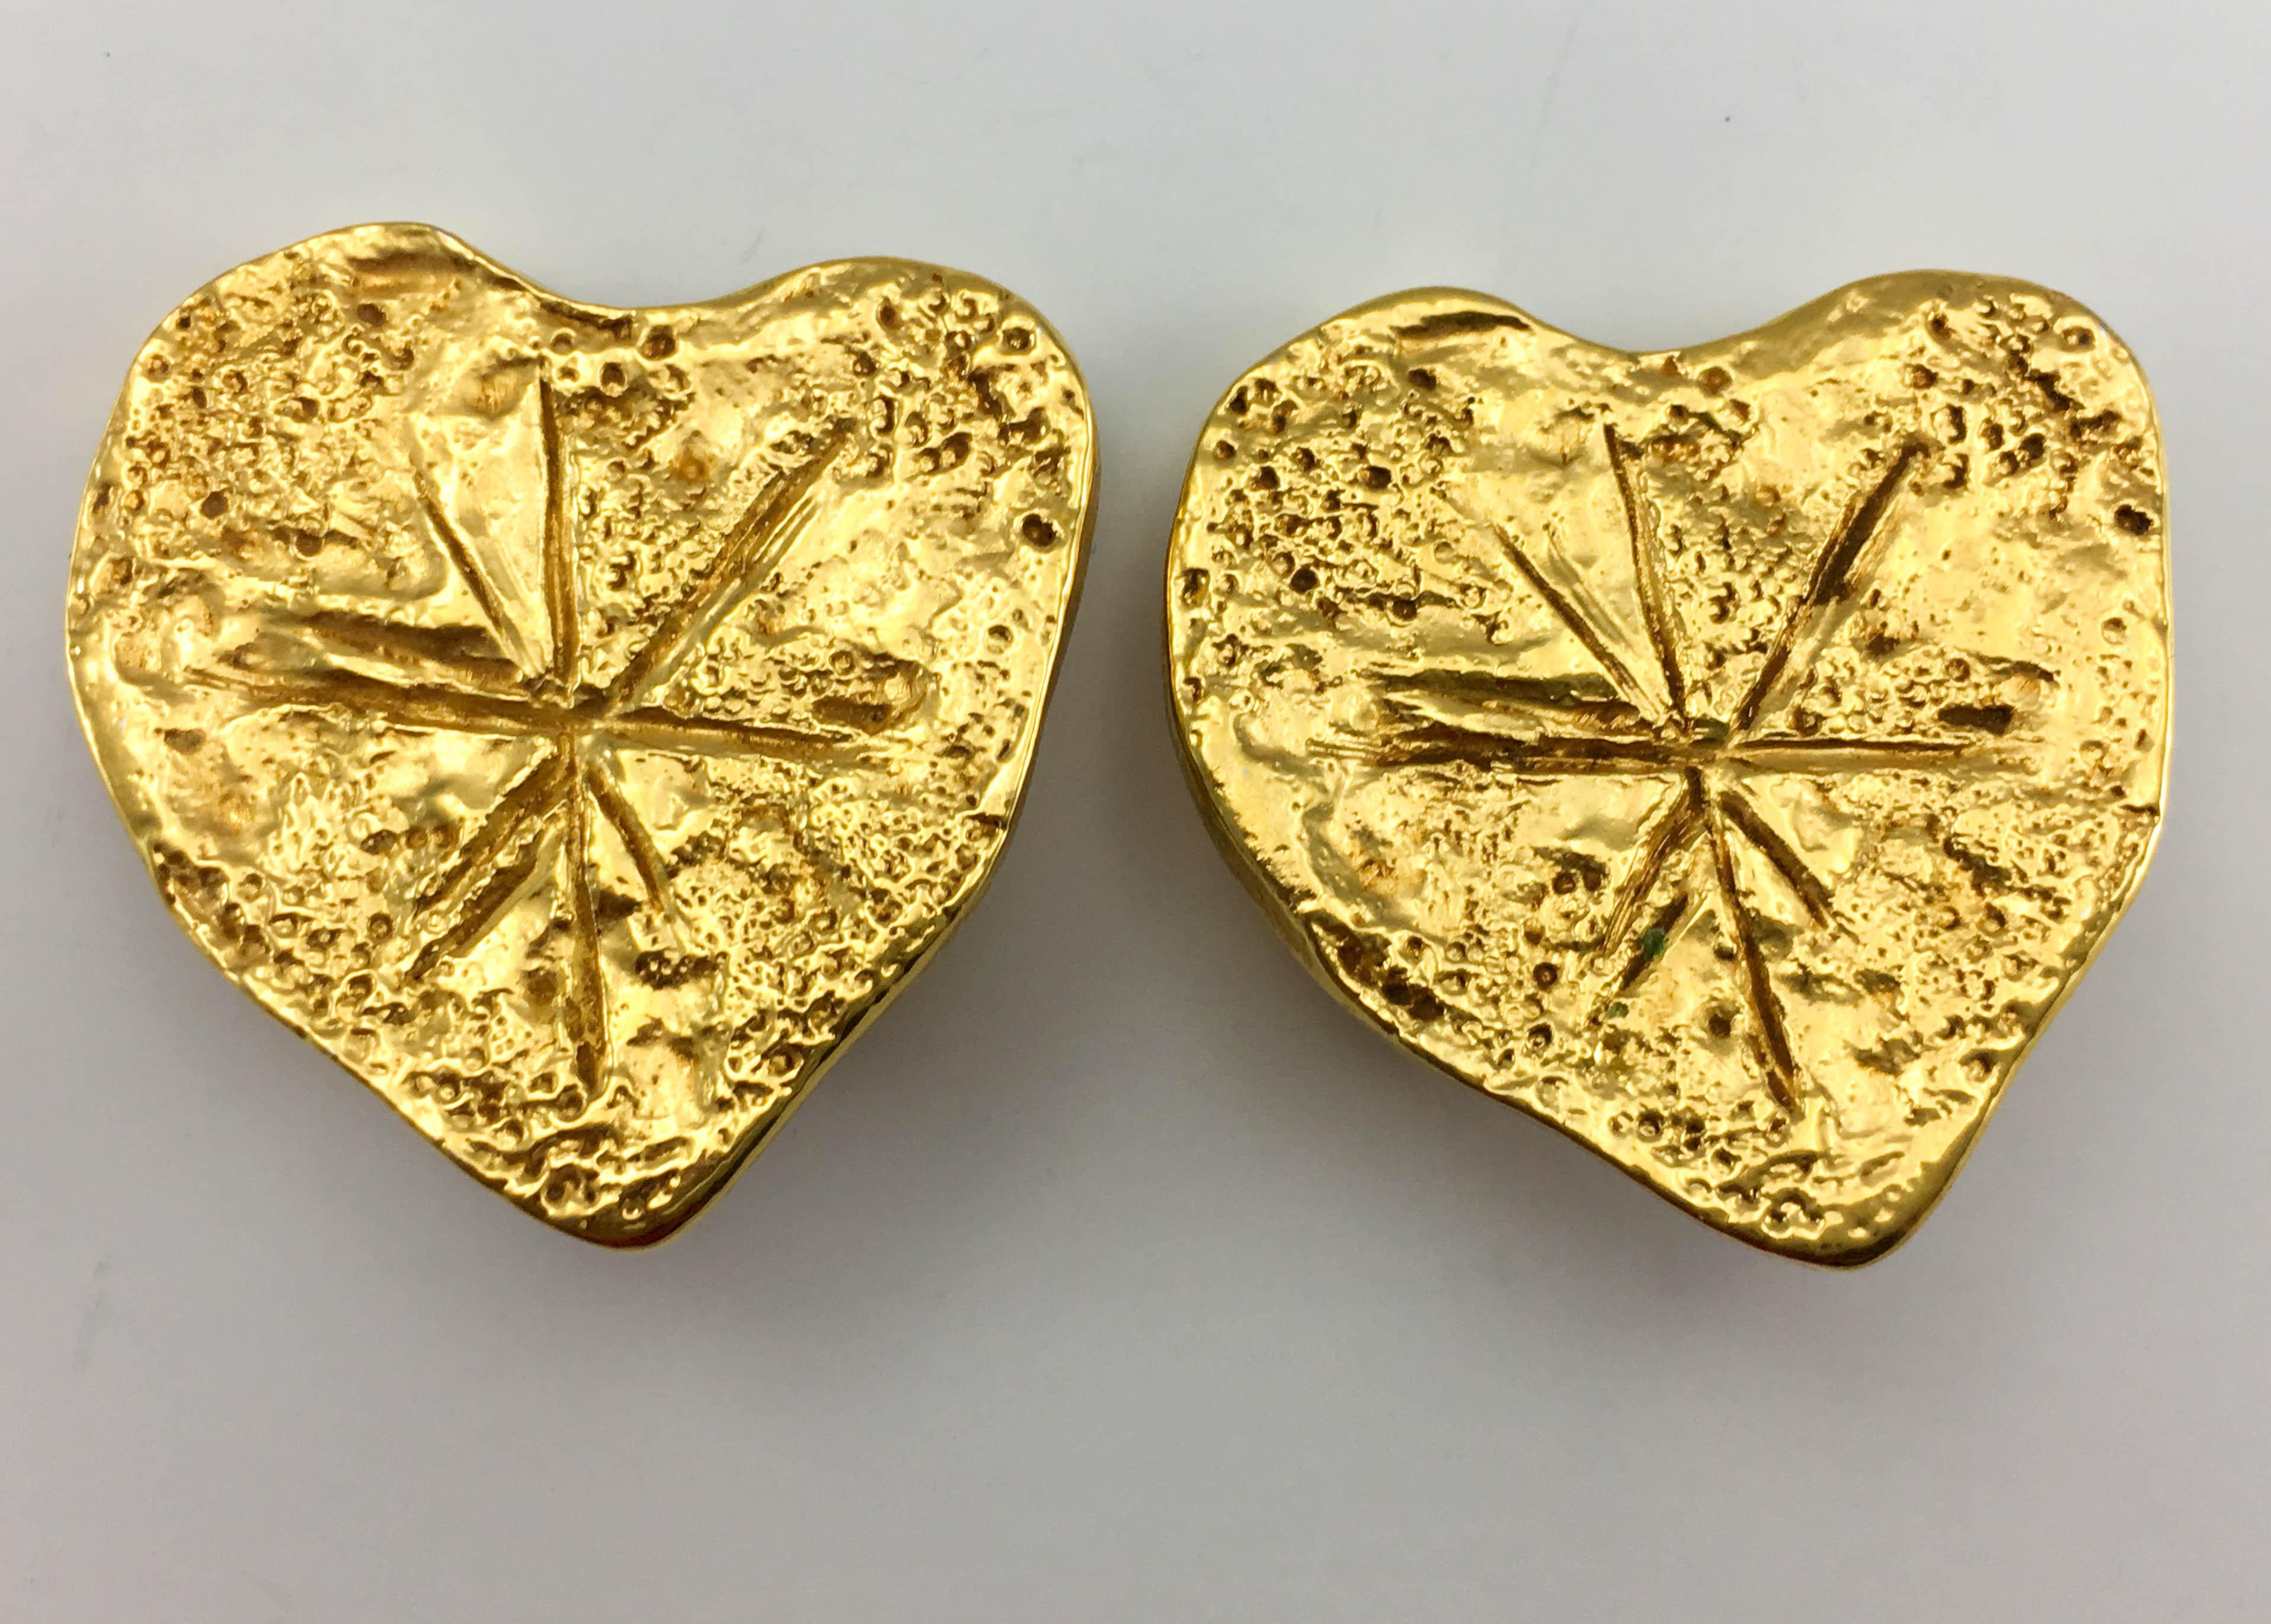 1994 Christian Lacroix Gold-Plated Modernist Heart Earrings For Sale 2